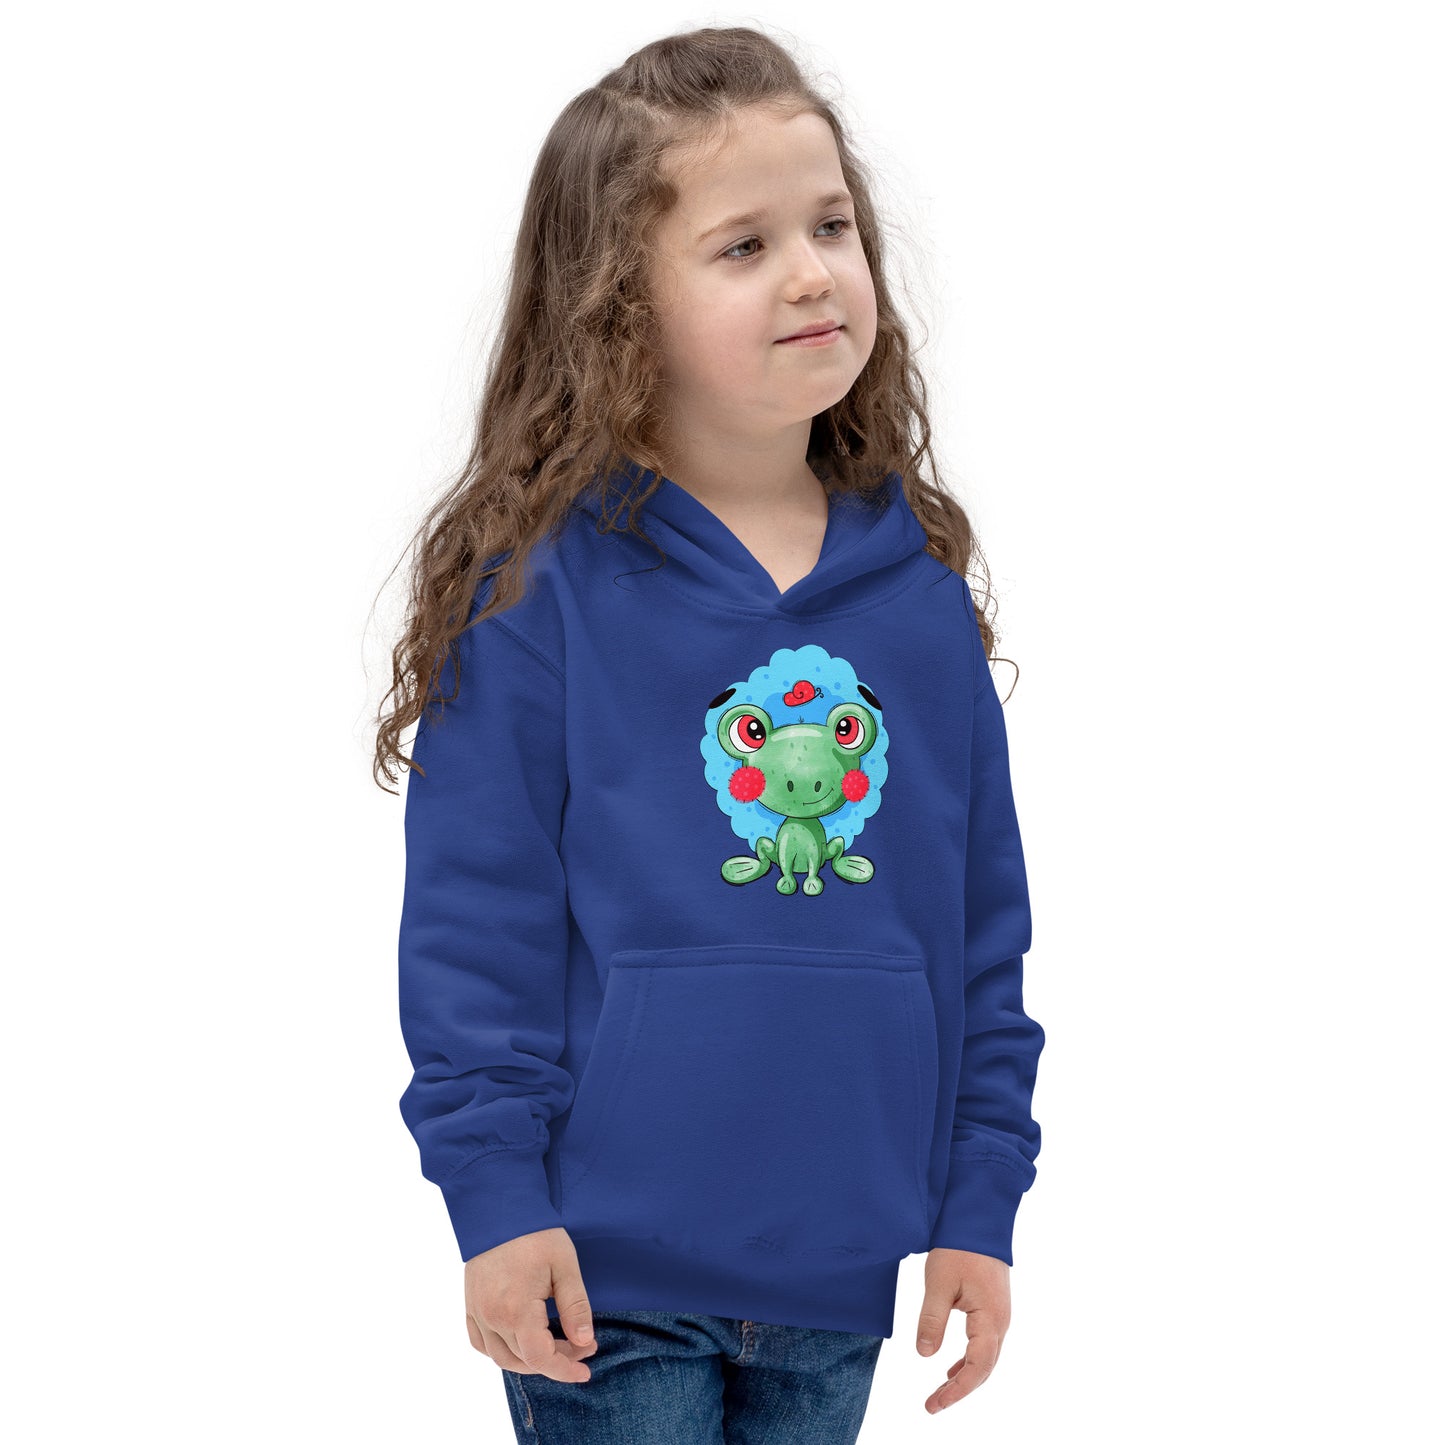 Lovely Frog Hoodie, No. 0474